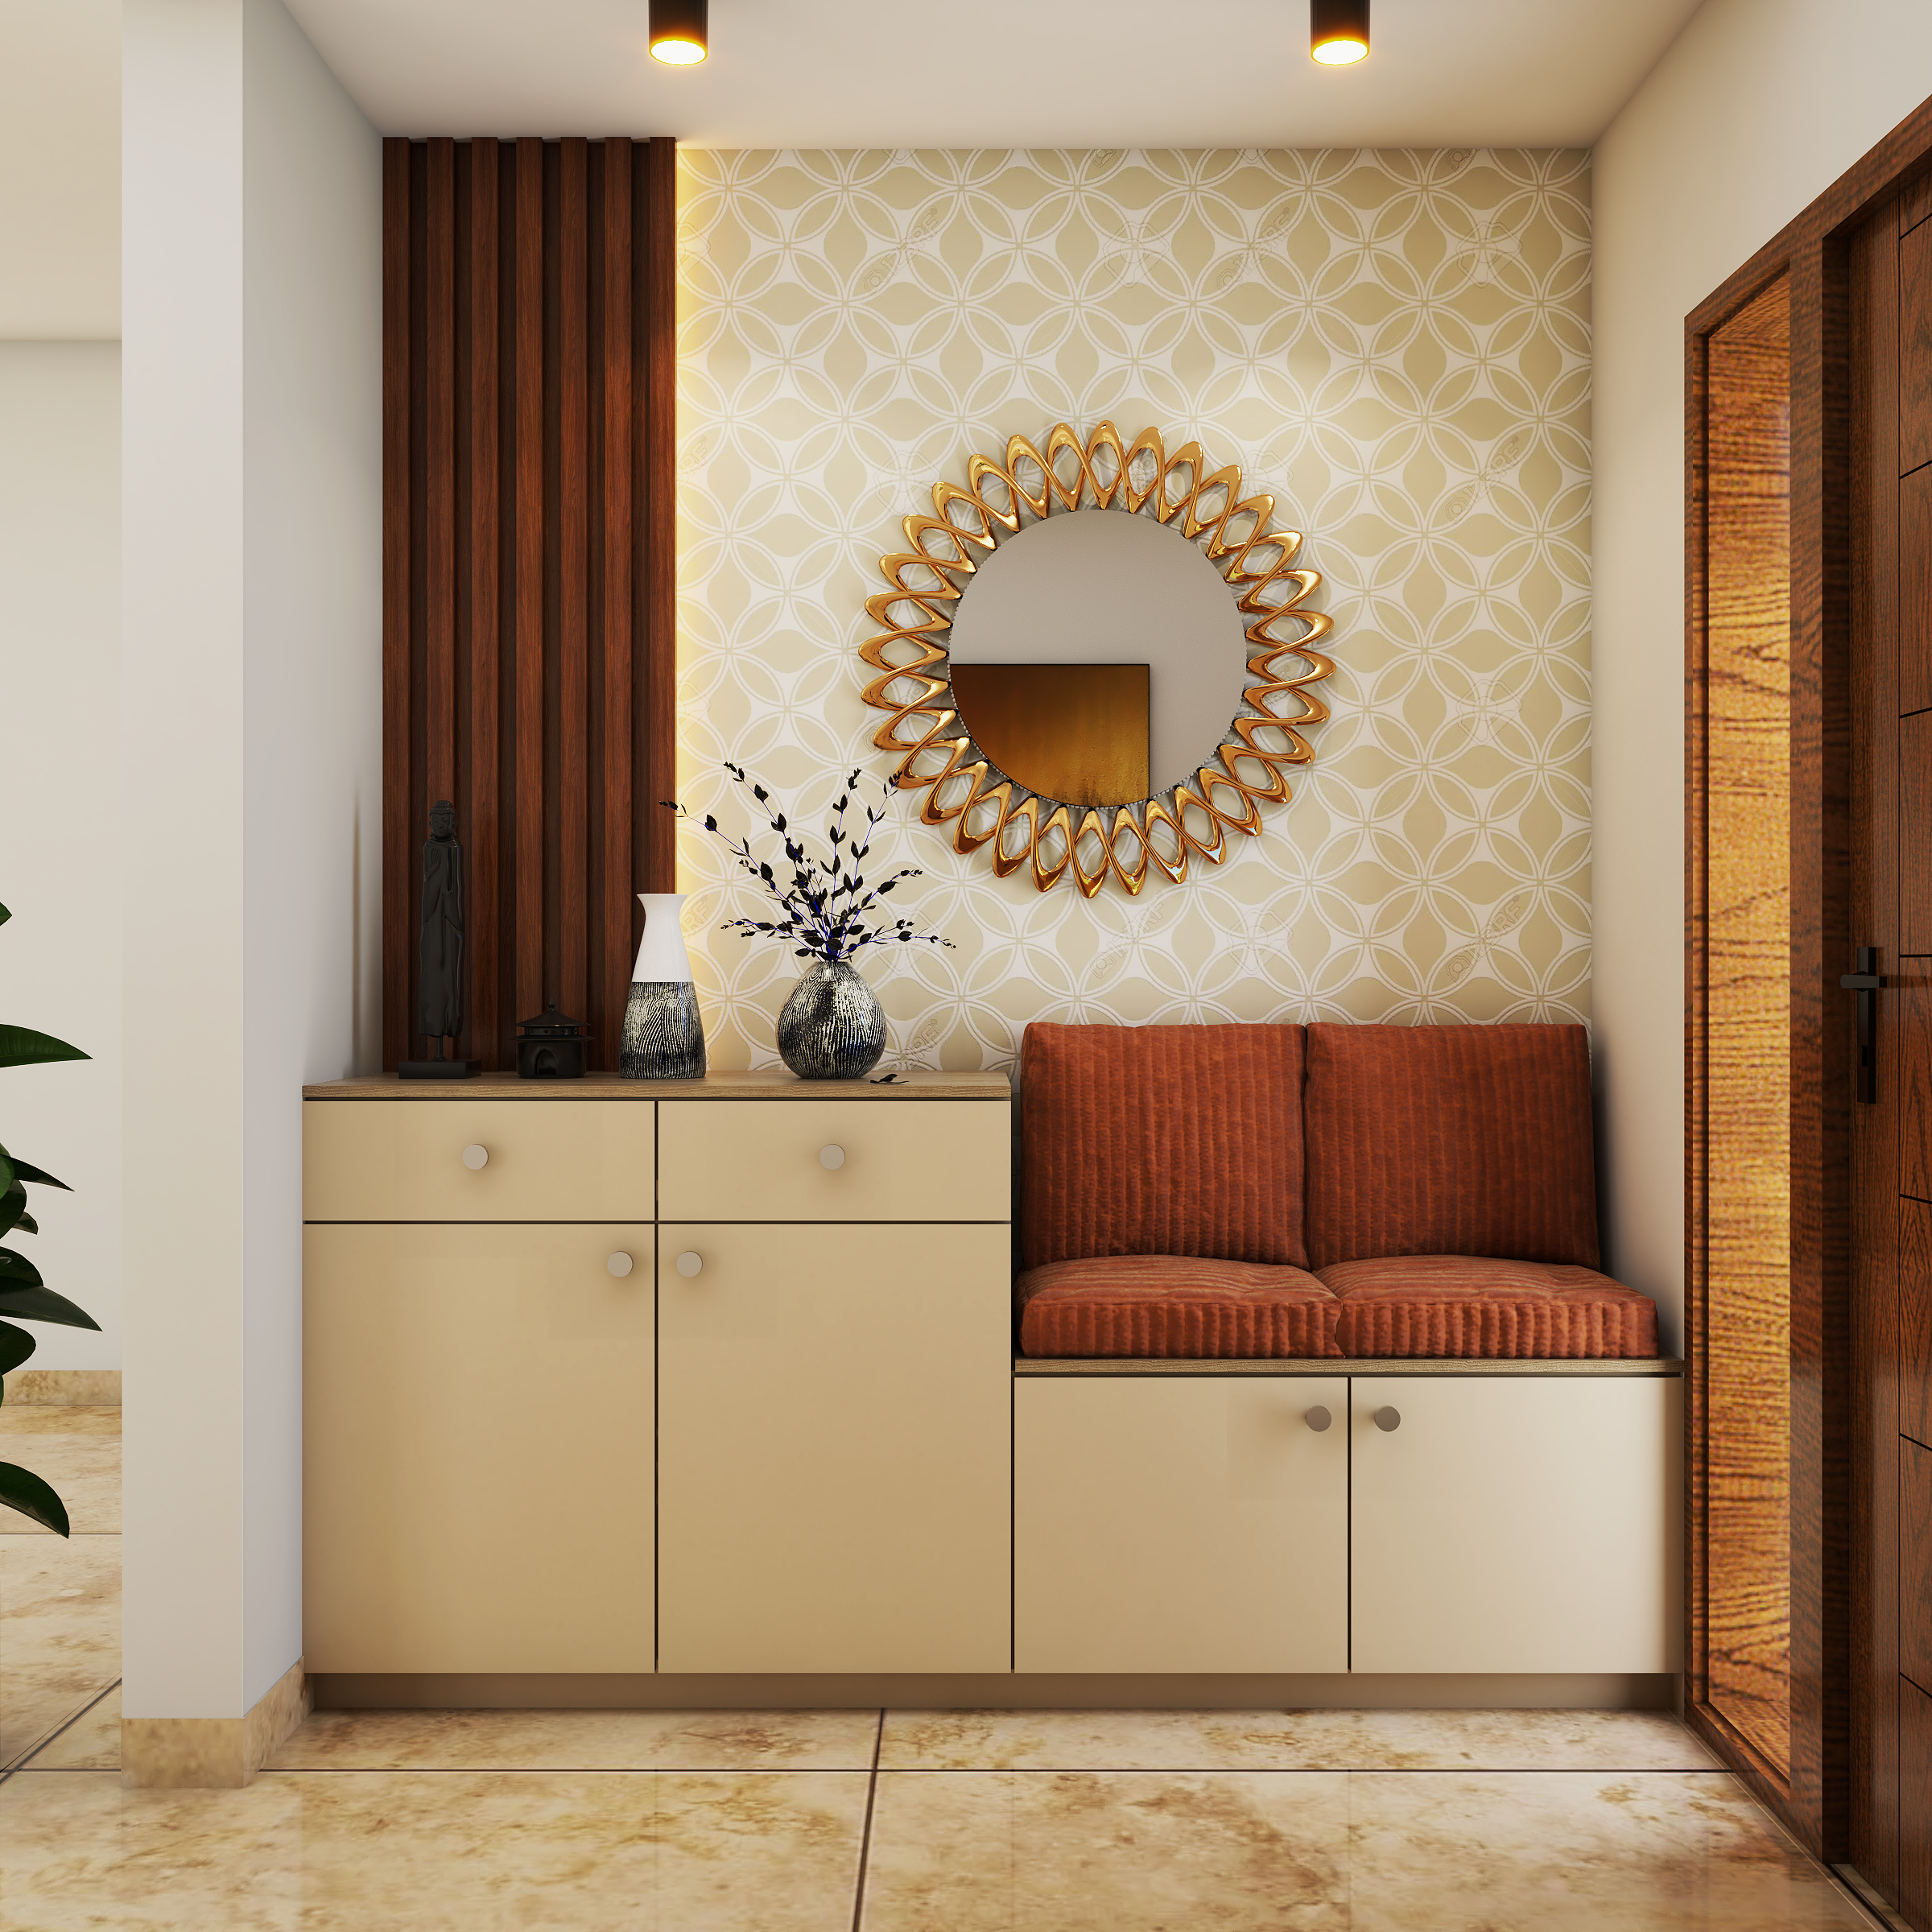 Contemporary Brown-Themed Foyer Design With Wallpaper And Laminated Cabinets